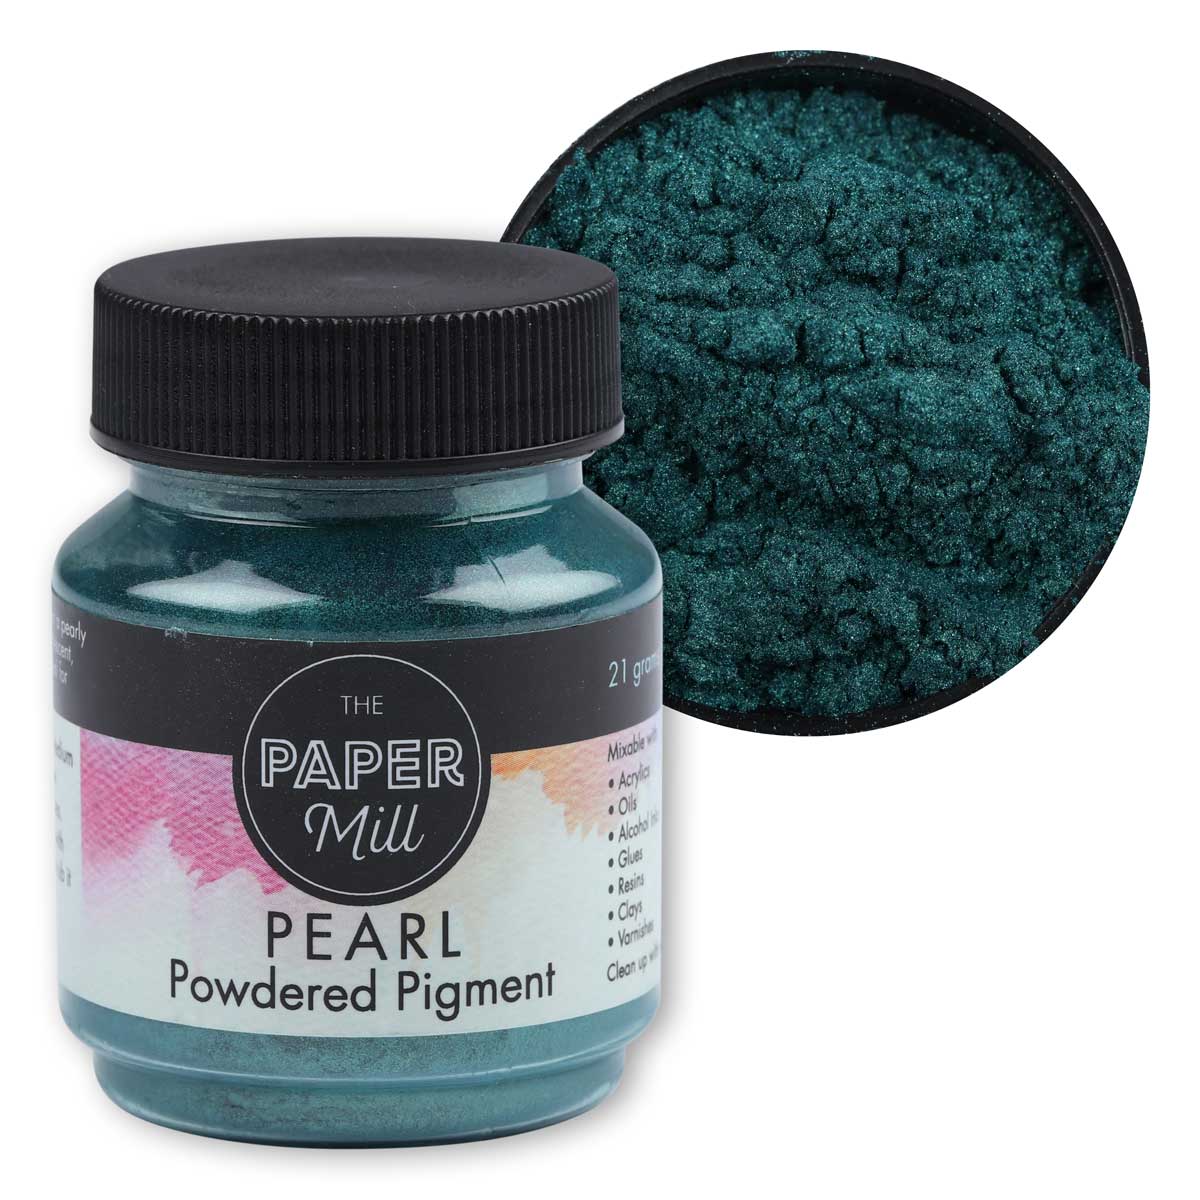 Image of The Paper Mill Pearl Powdered Pigment Palm Green 21g